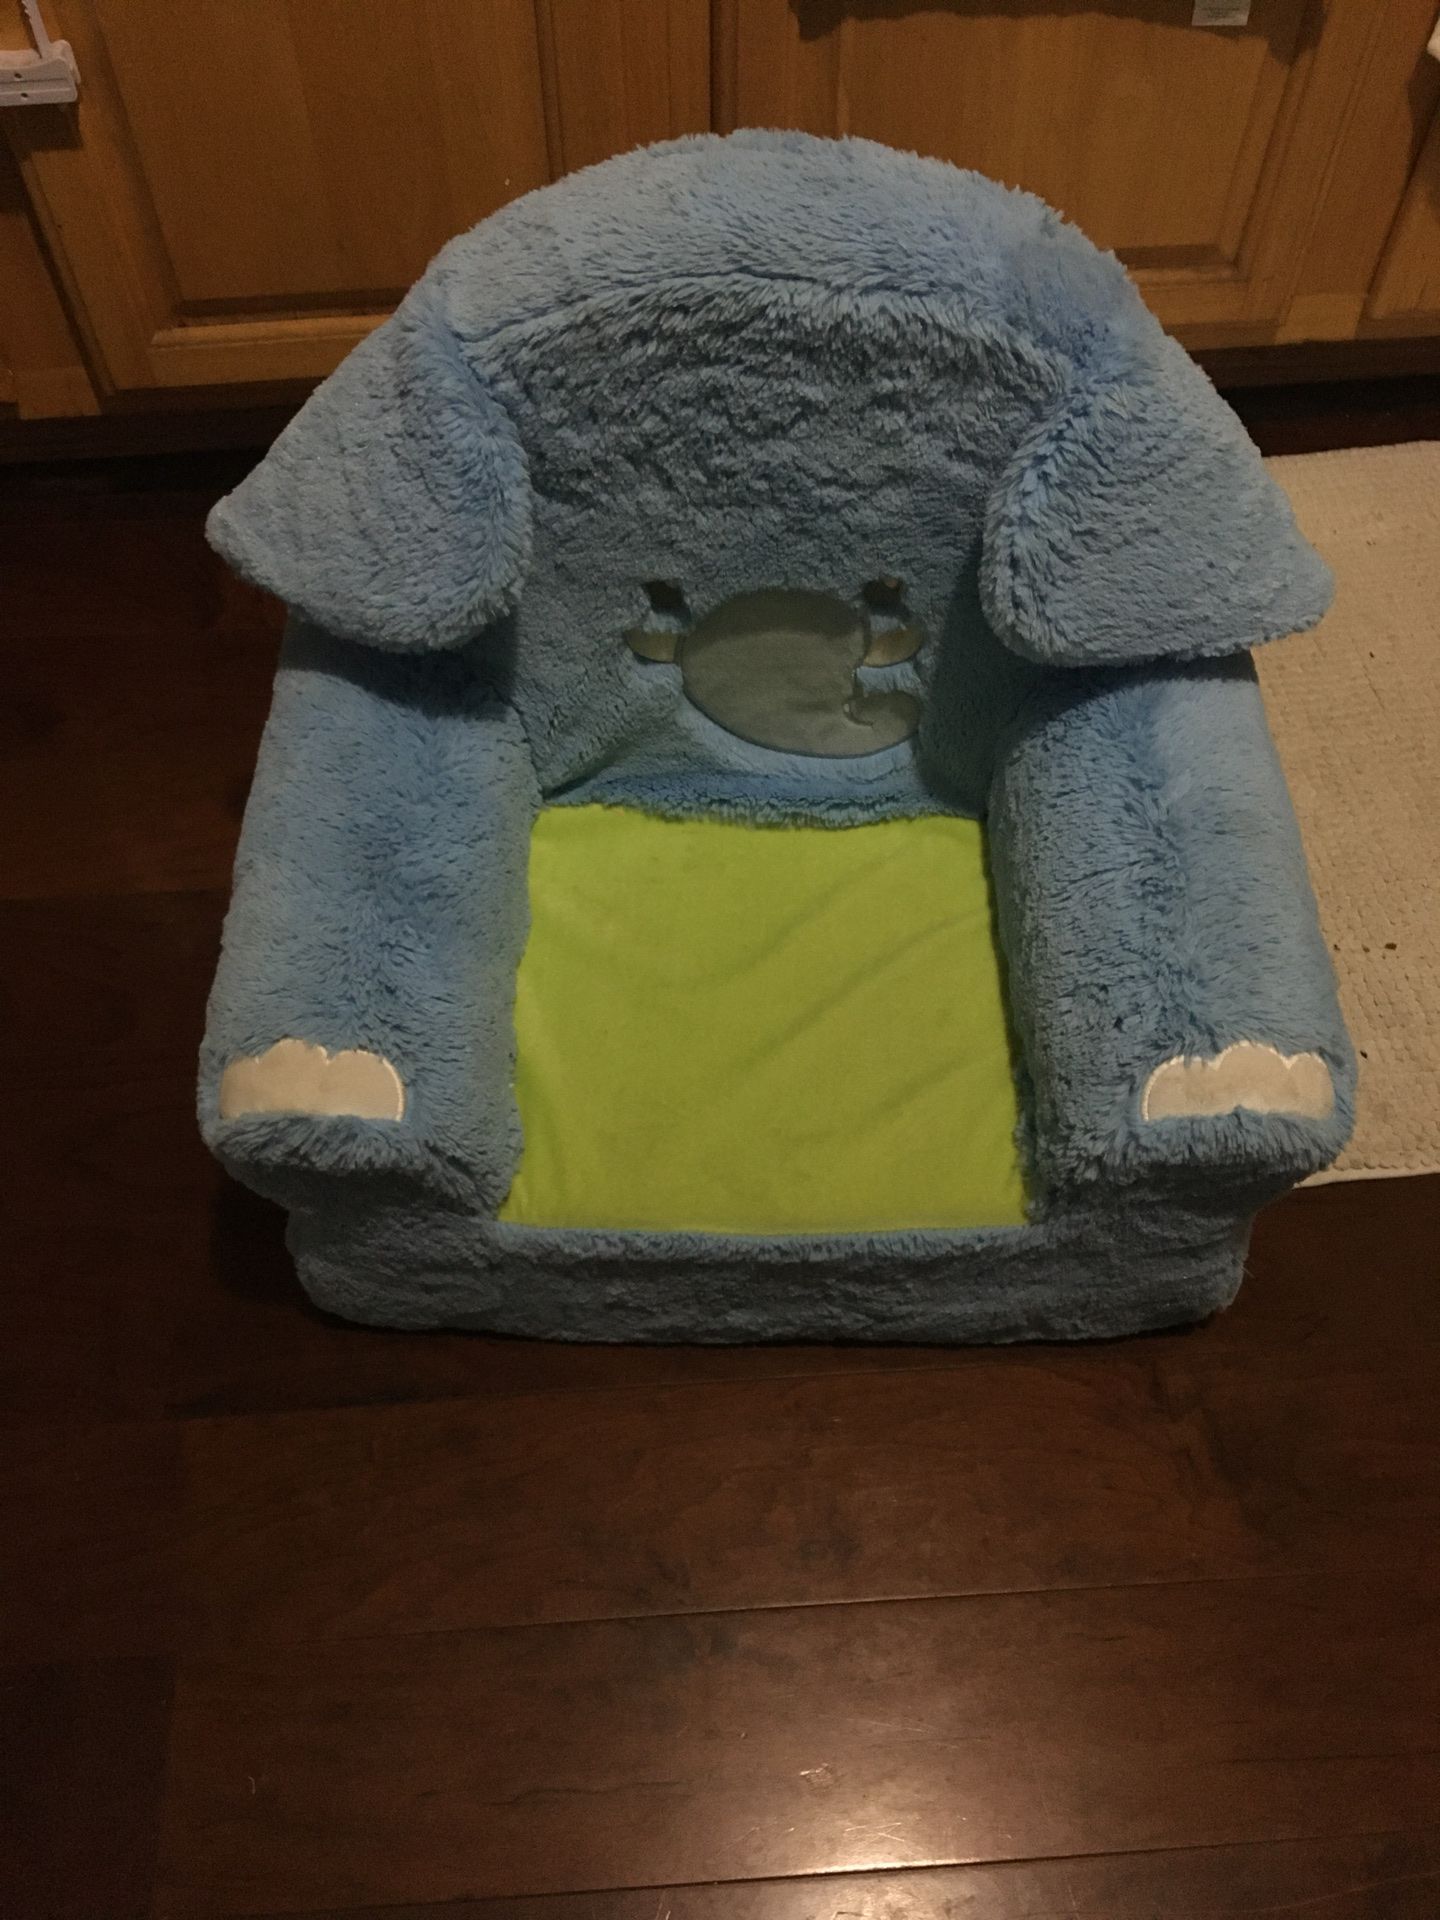 Toddler soft chair